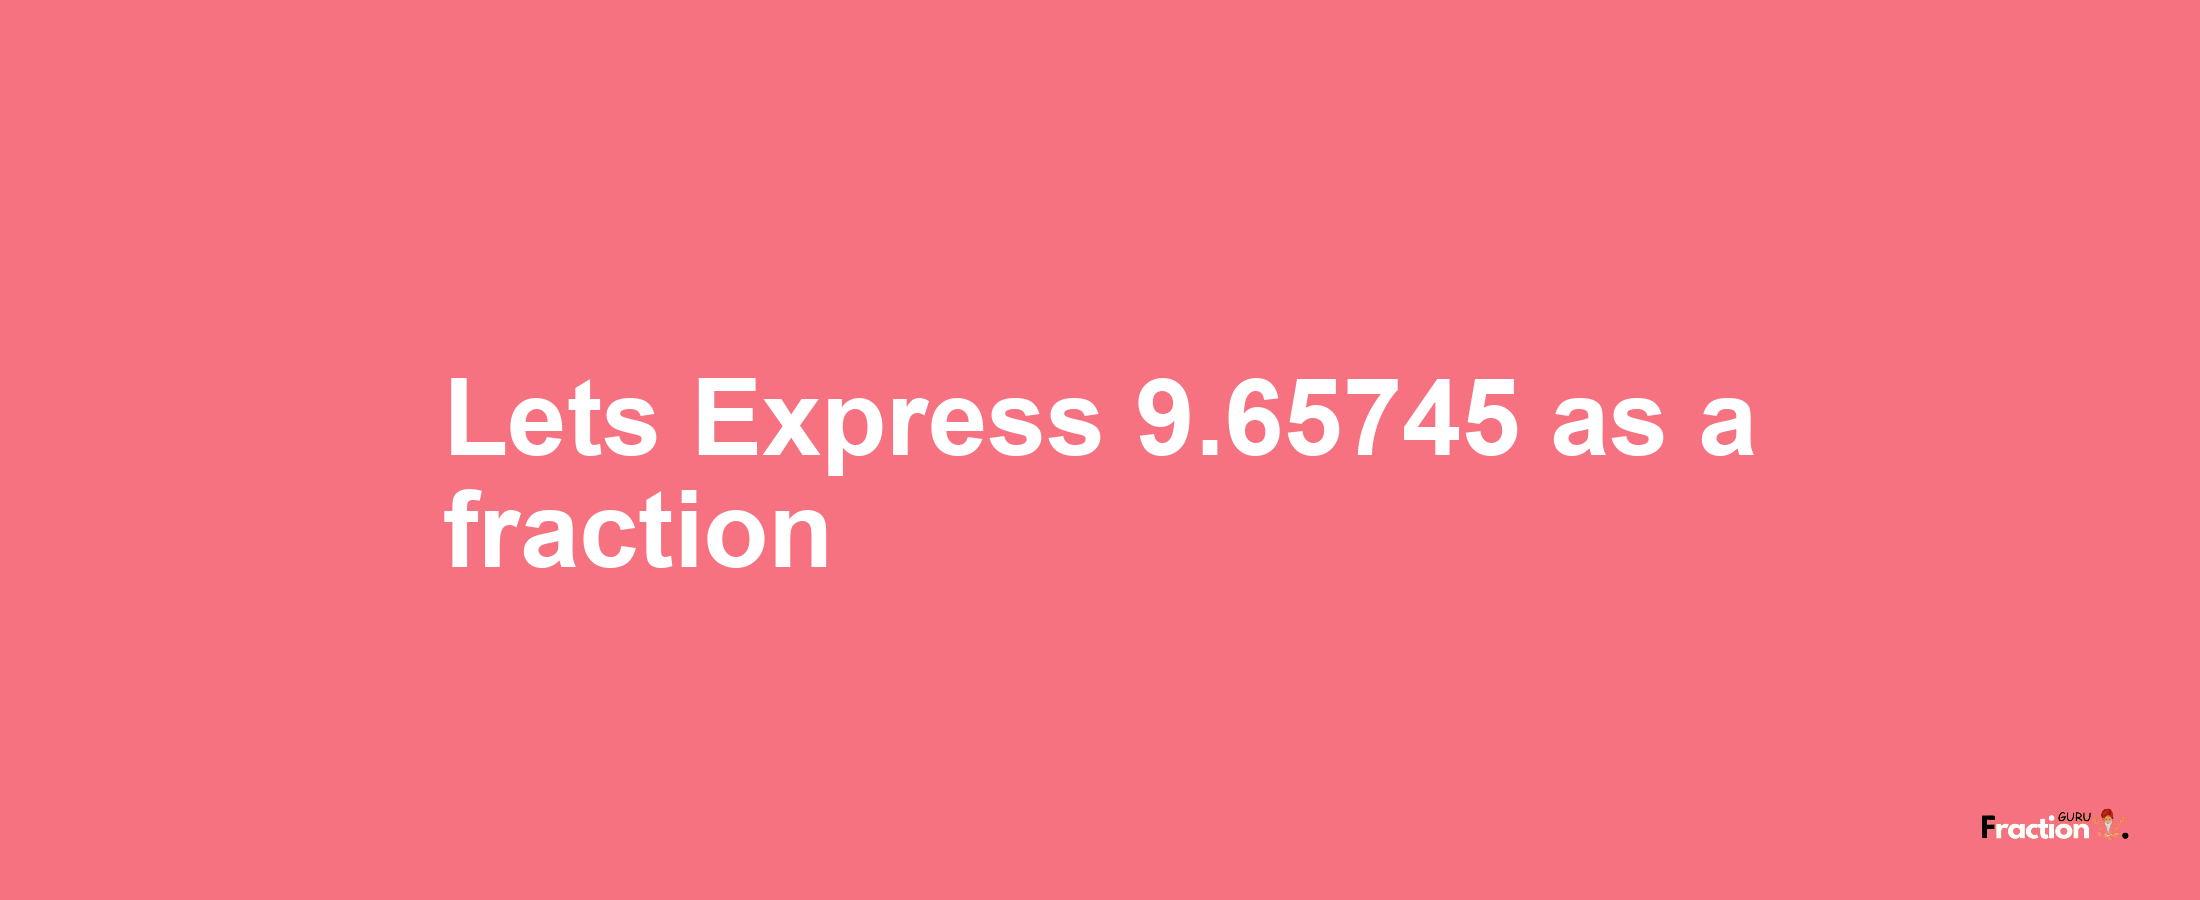 Lets Express 9.65745 as afraction